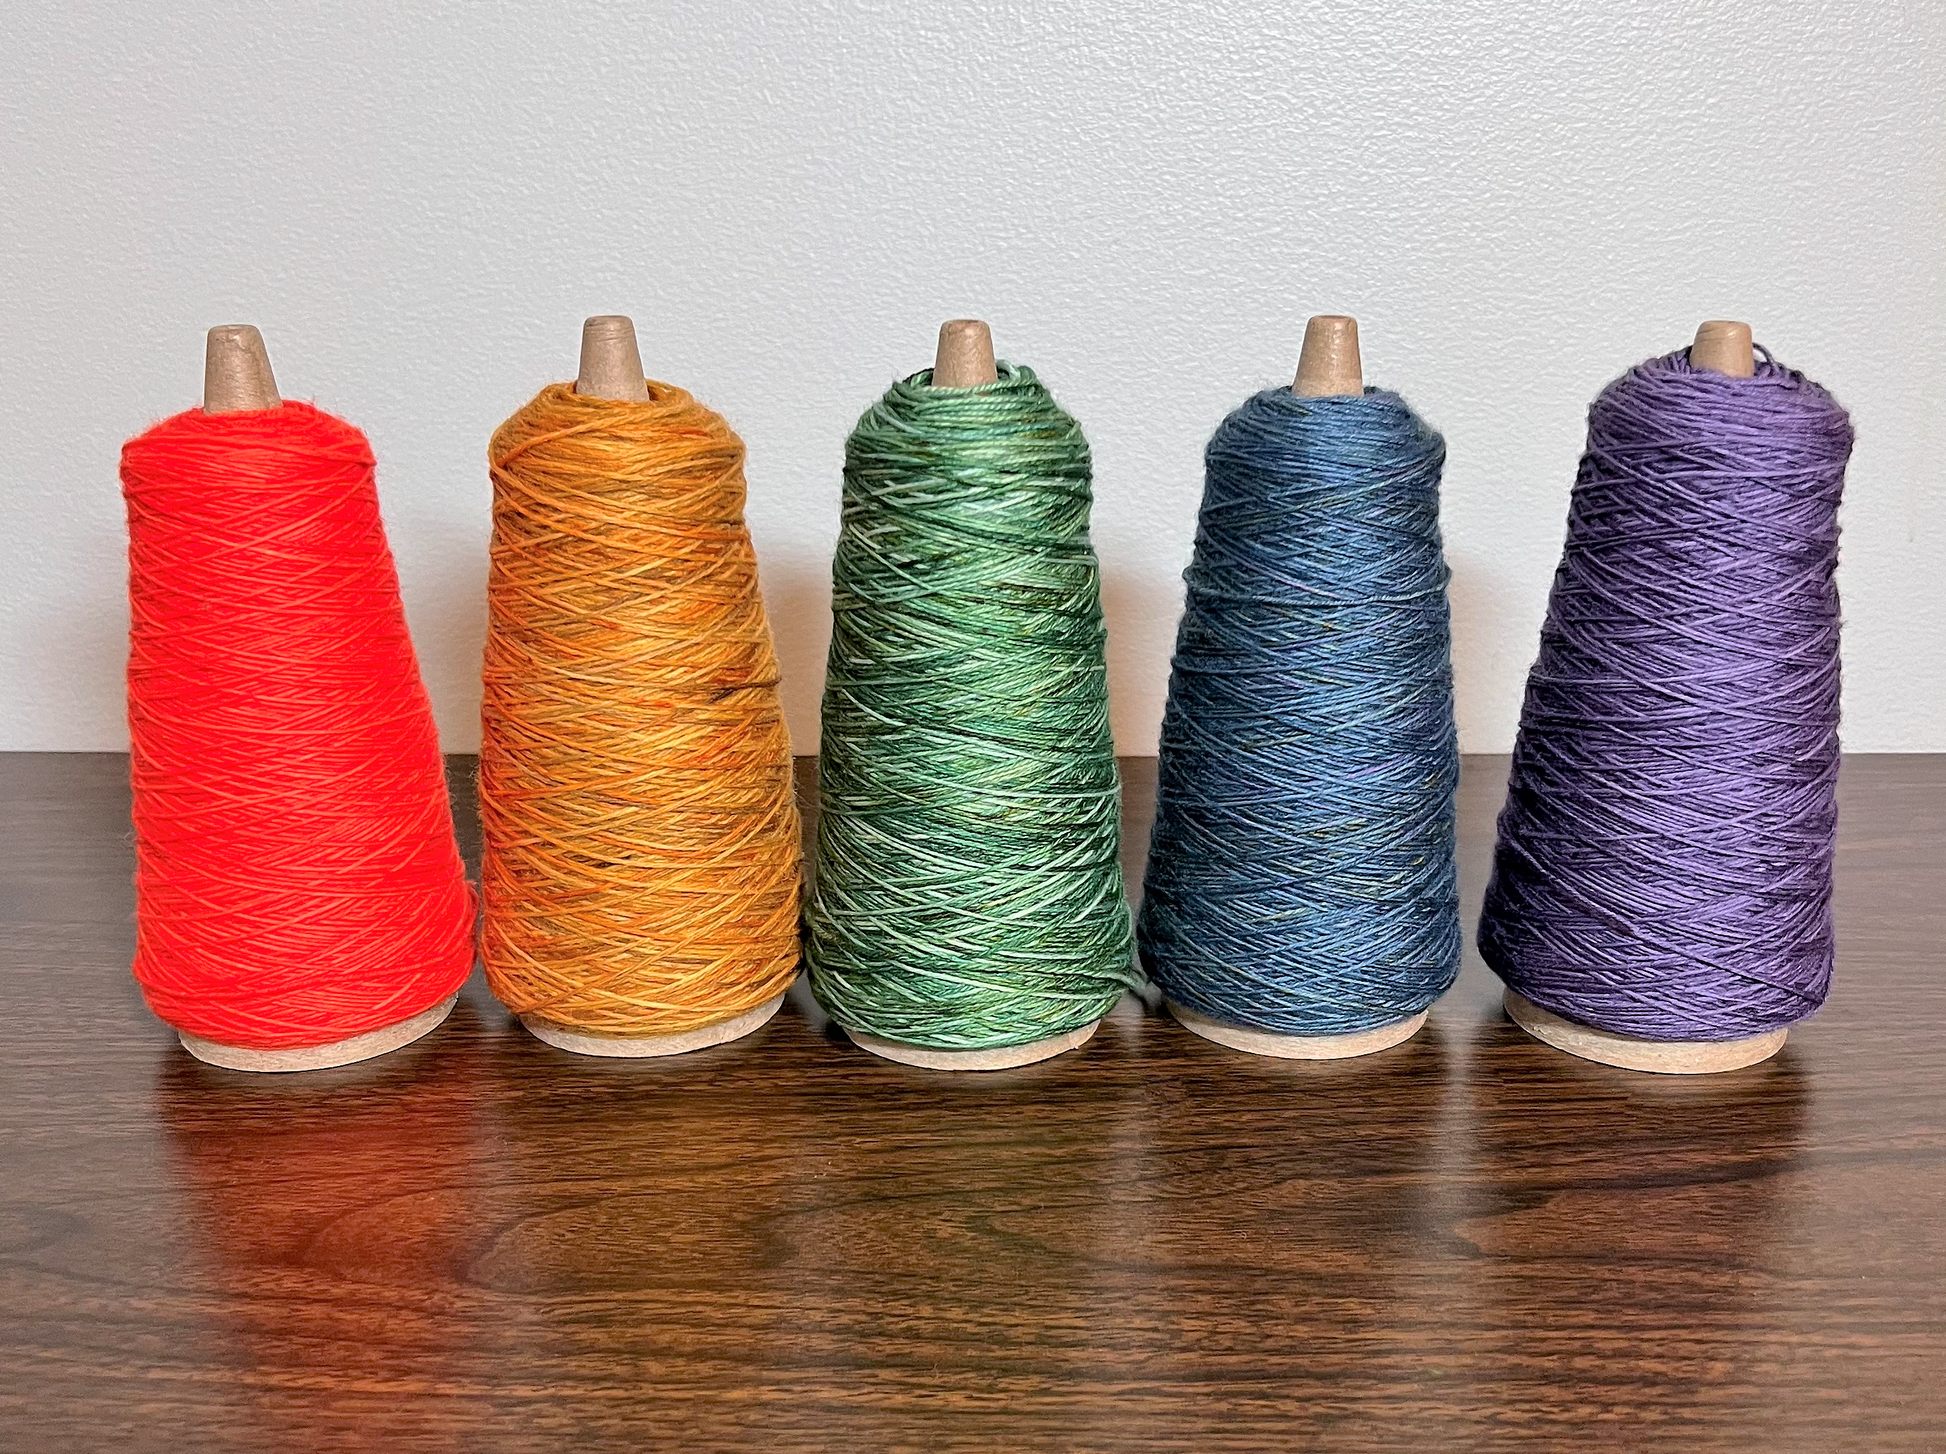 5 wound cones of yarn, varying color